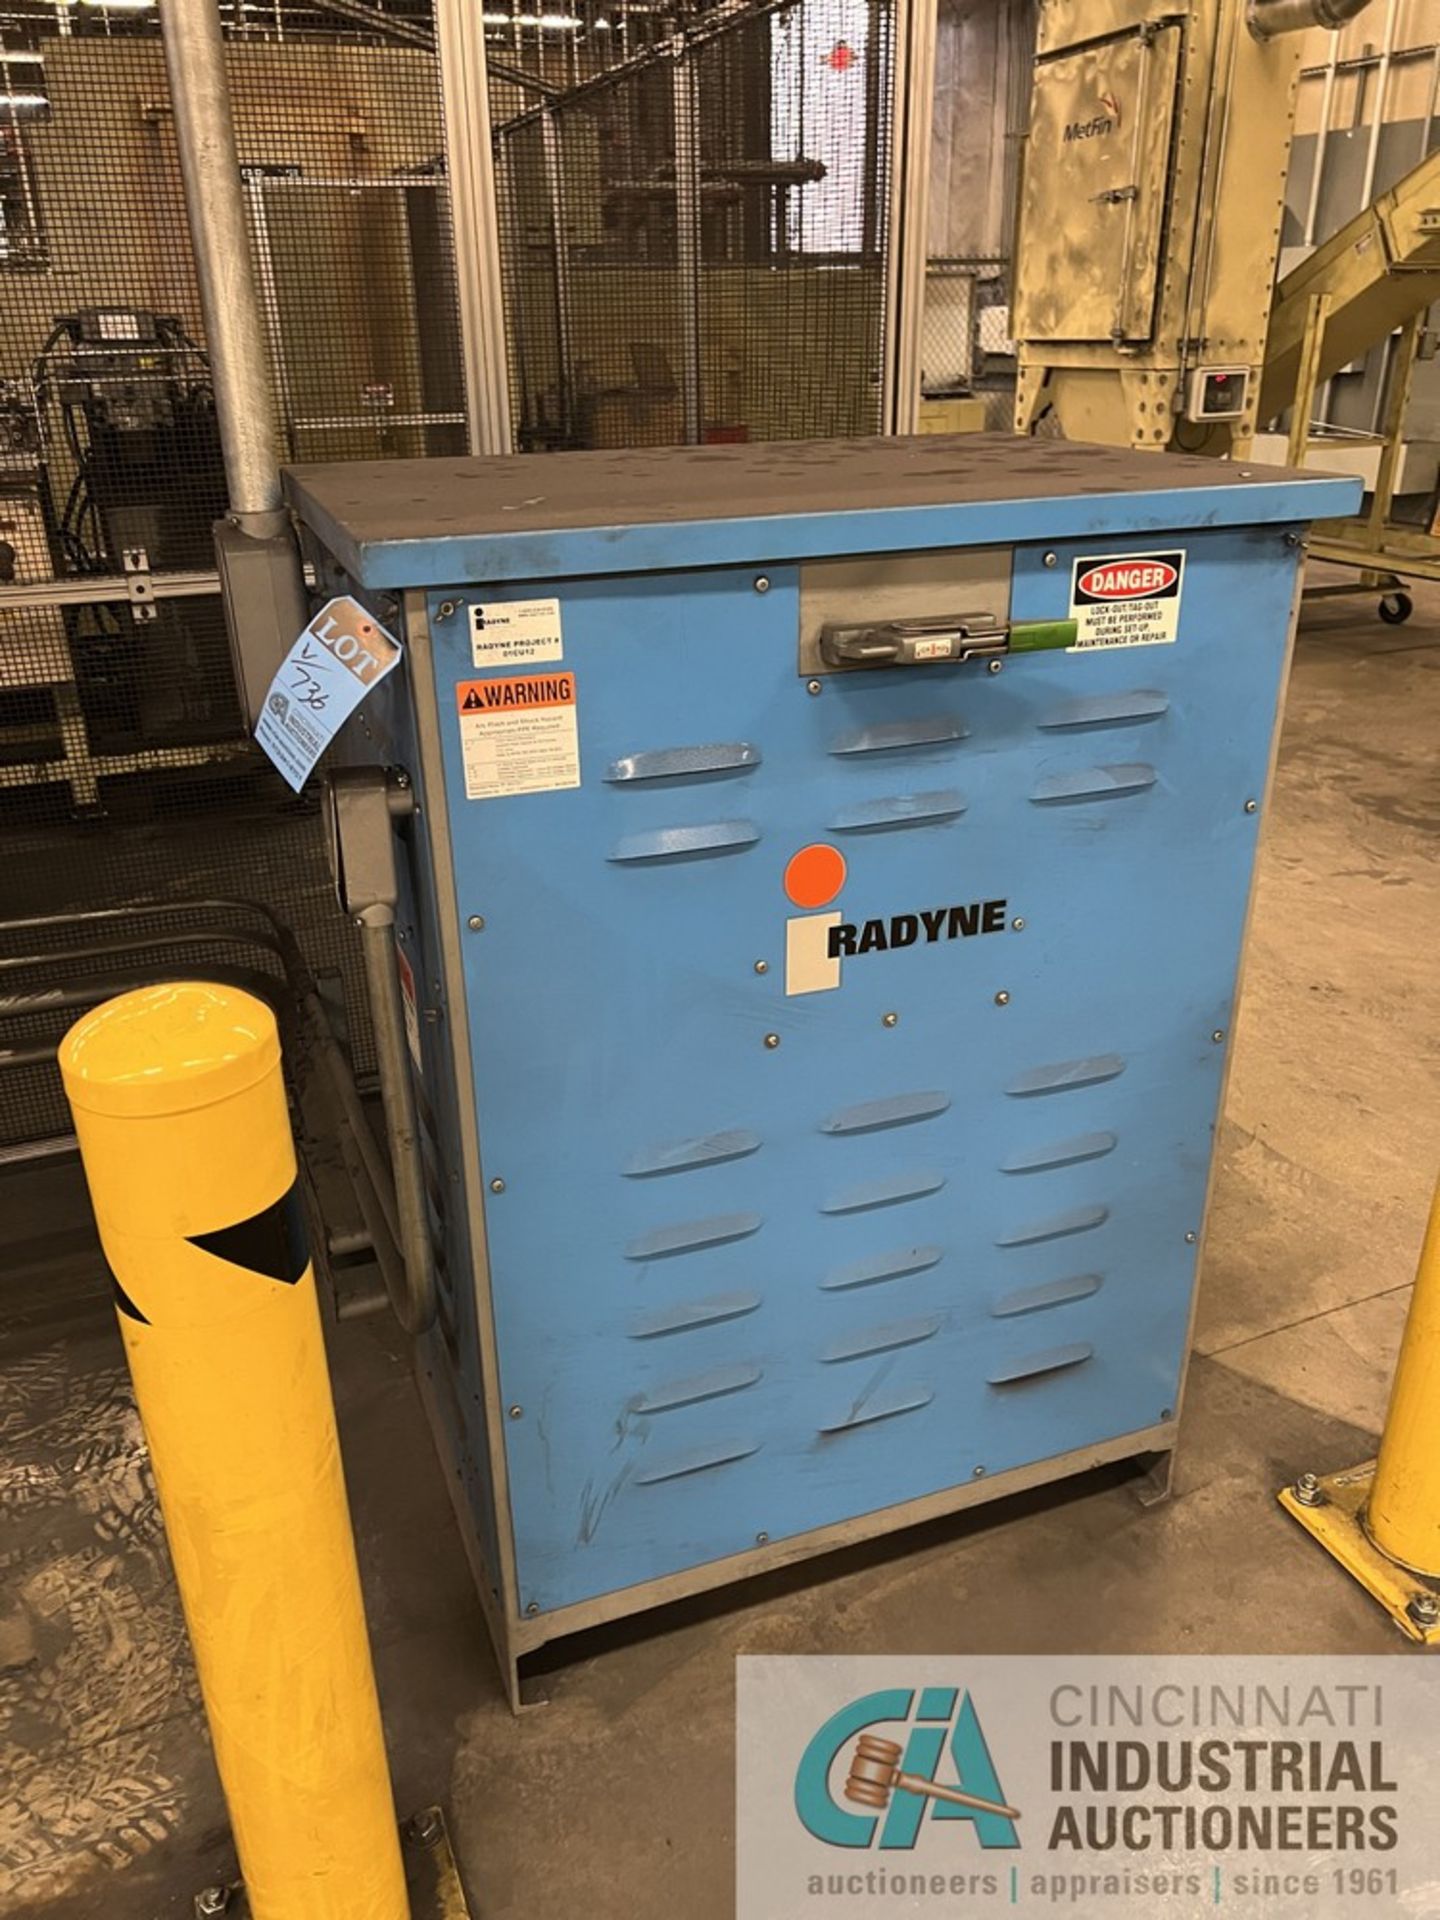 100 KW THERMATOOL RADYNE MODEL CFM3-1006460 INDUCTION HEATER; S/N 2778, 2-STATION HEAT STATION AND - Image 5 of 11